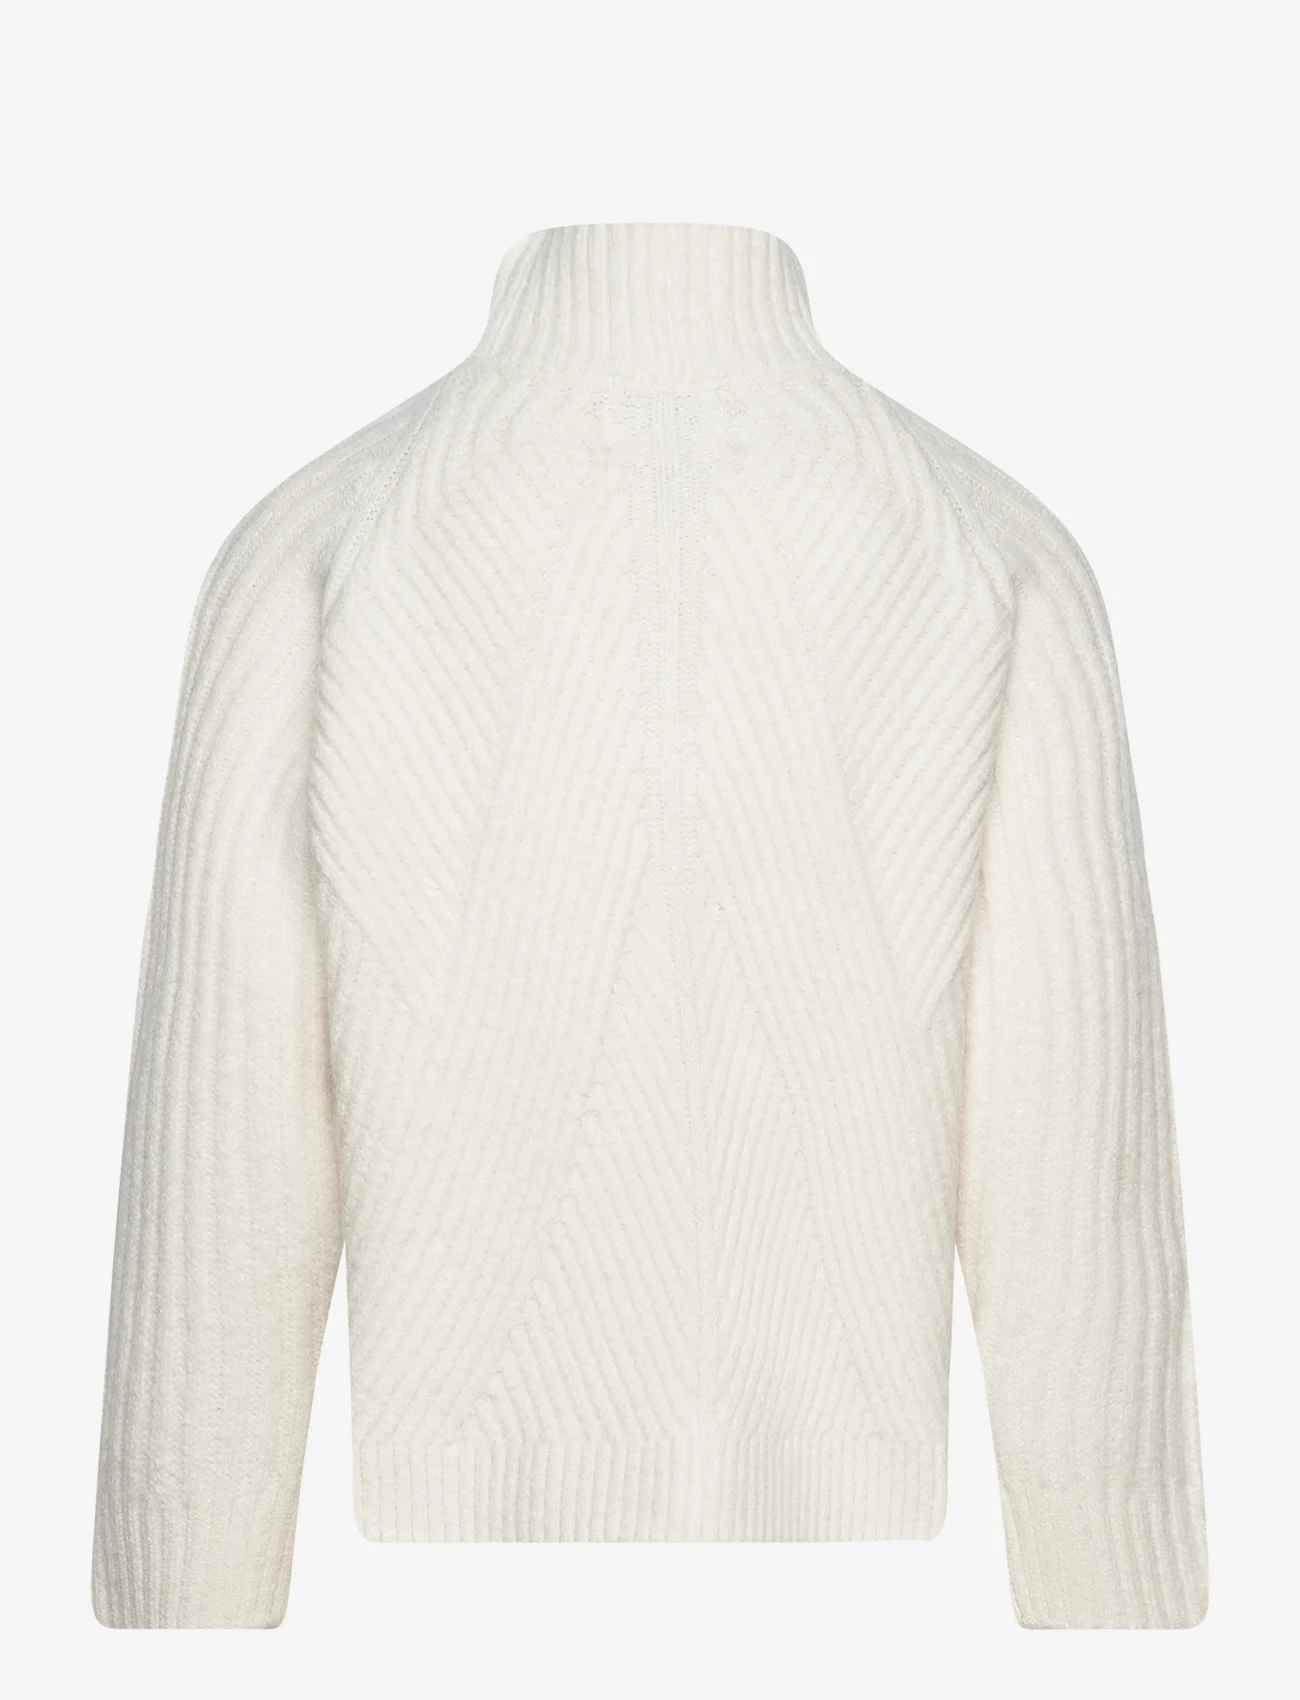 Sofie Schnoor Young - Sweater - neulepuserot - off white - 1